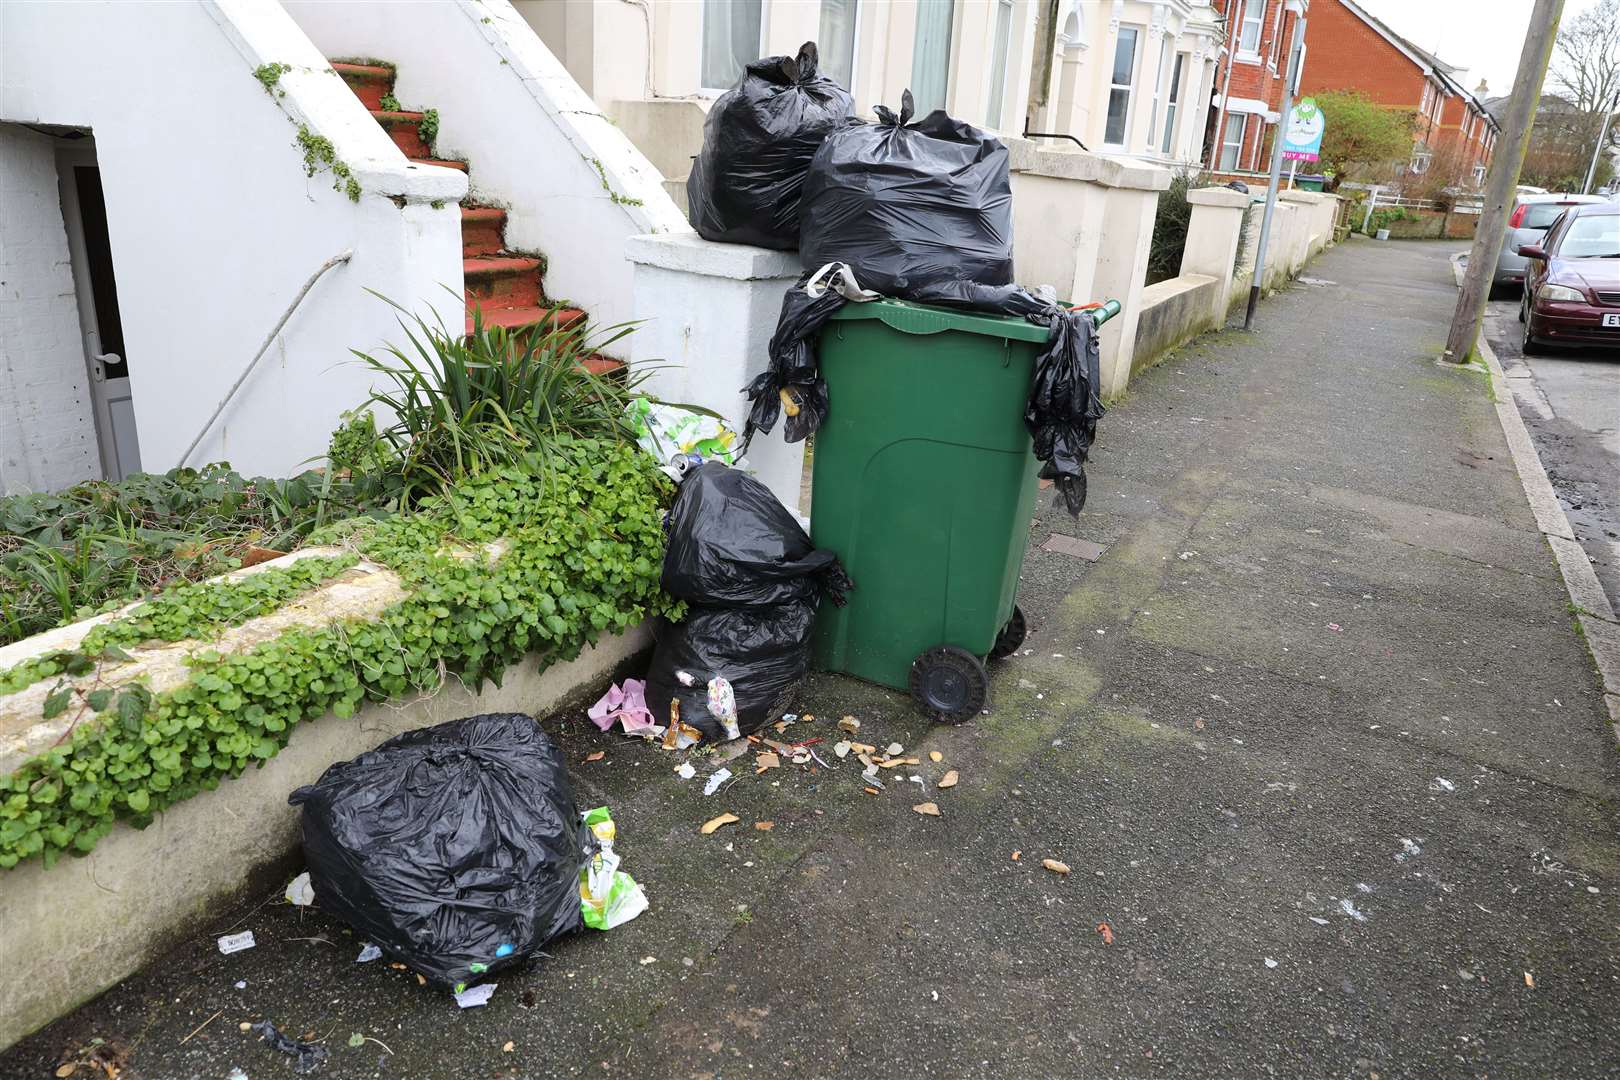 Russell Taylor wants to leave Folkestone due to the untidy nature of their street. Picture: Andy Jones